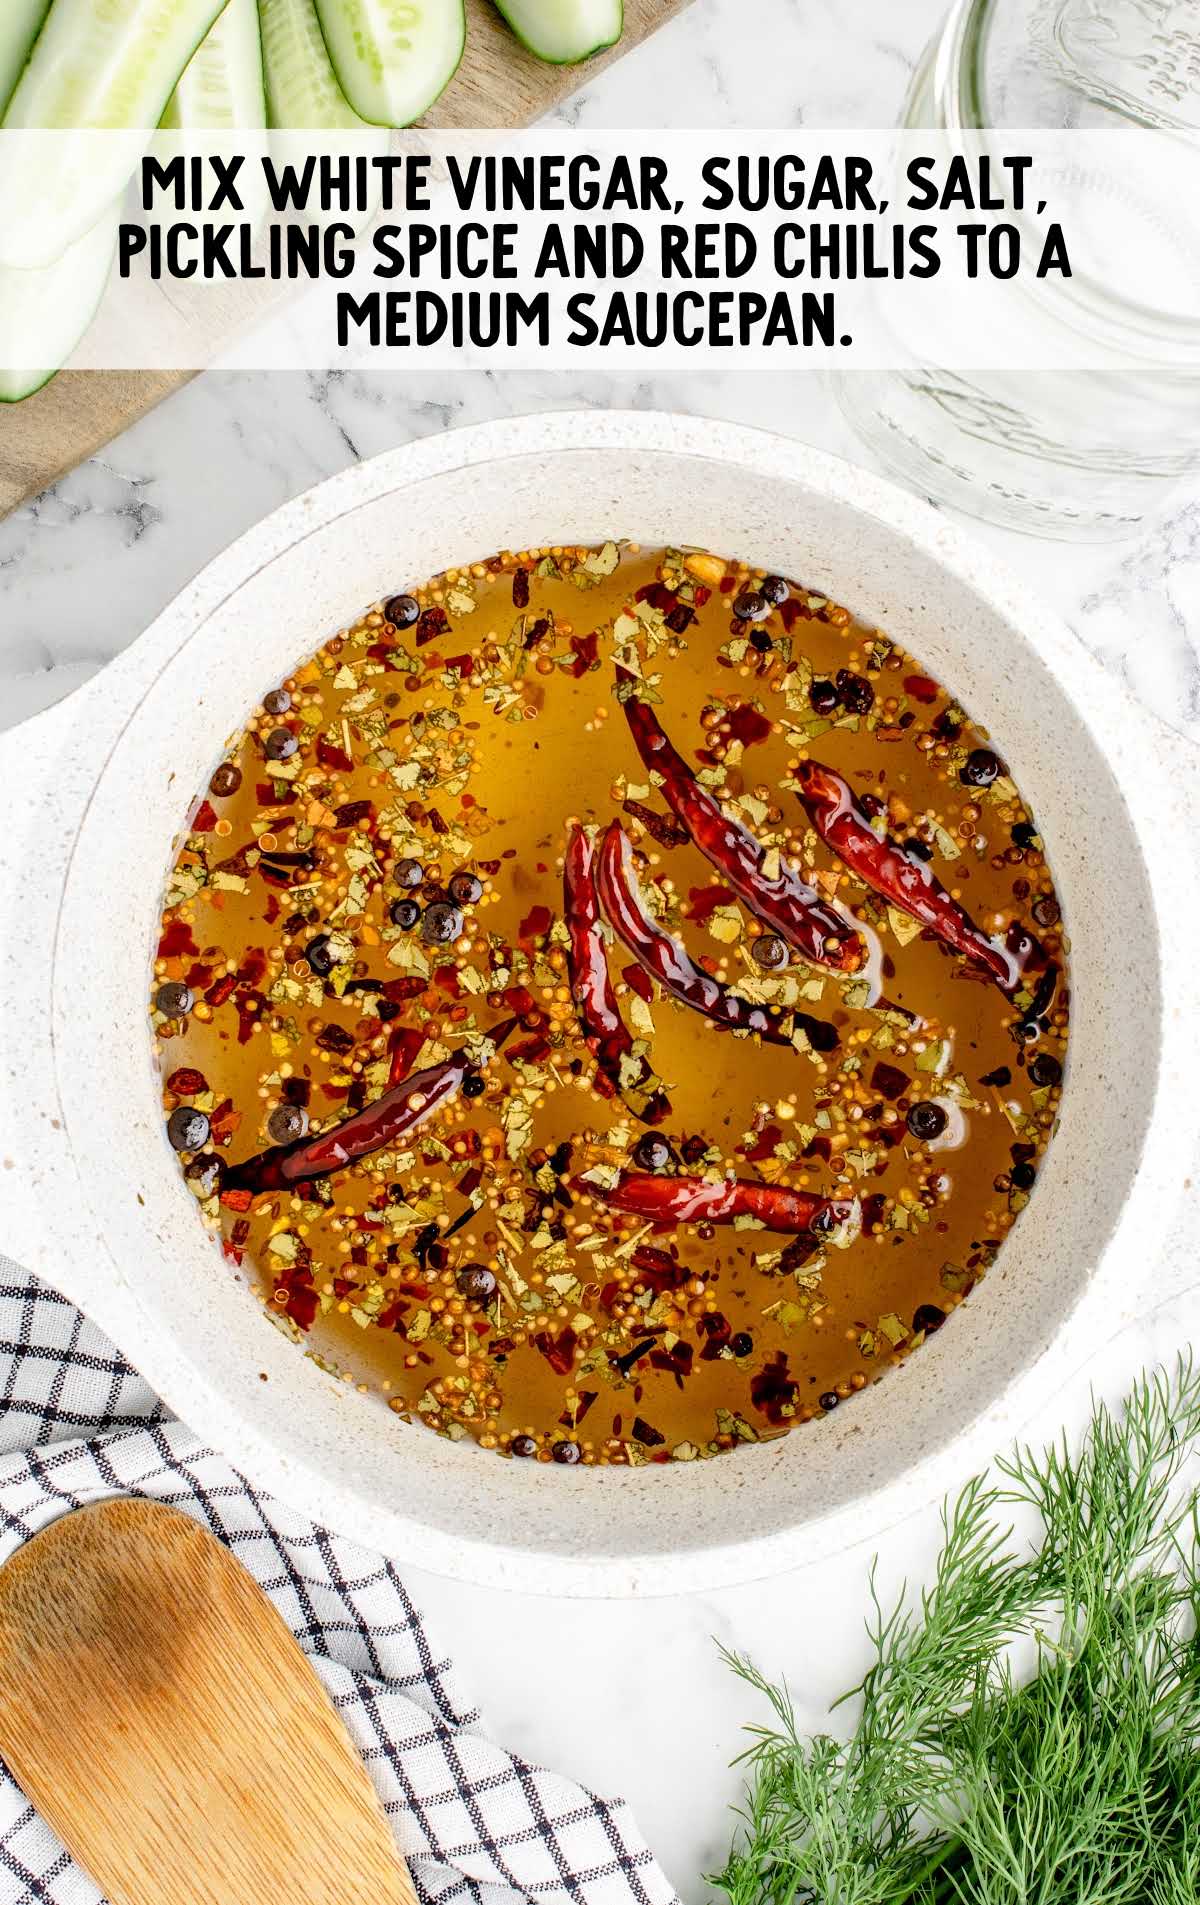 vinegar, sugar, salt, pickling spice and red chilies mixed in a bowl